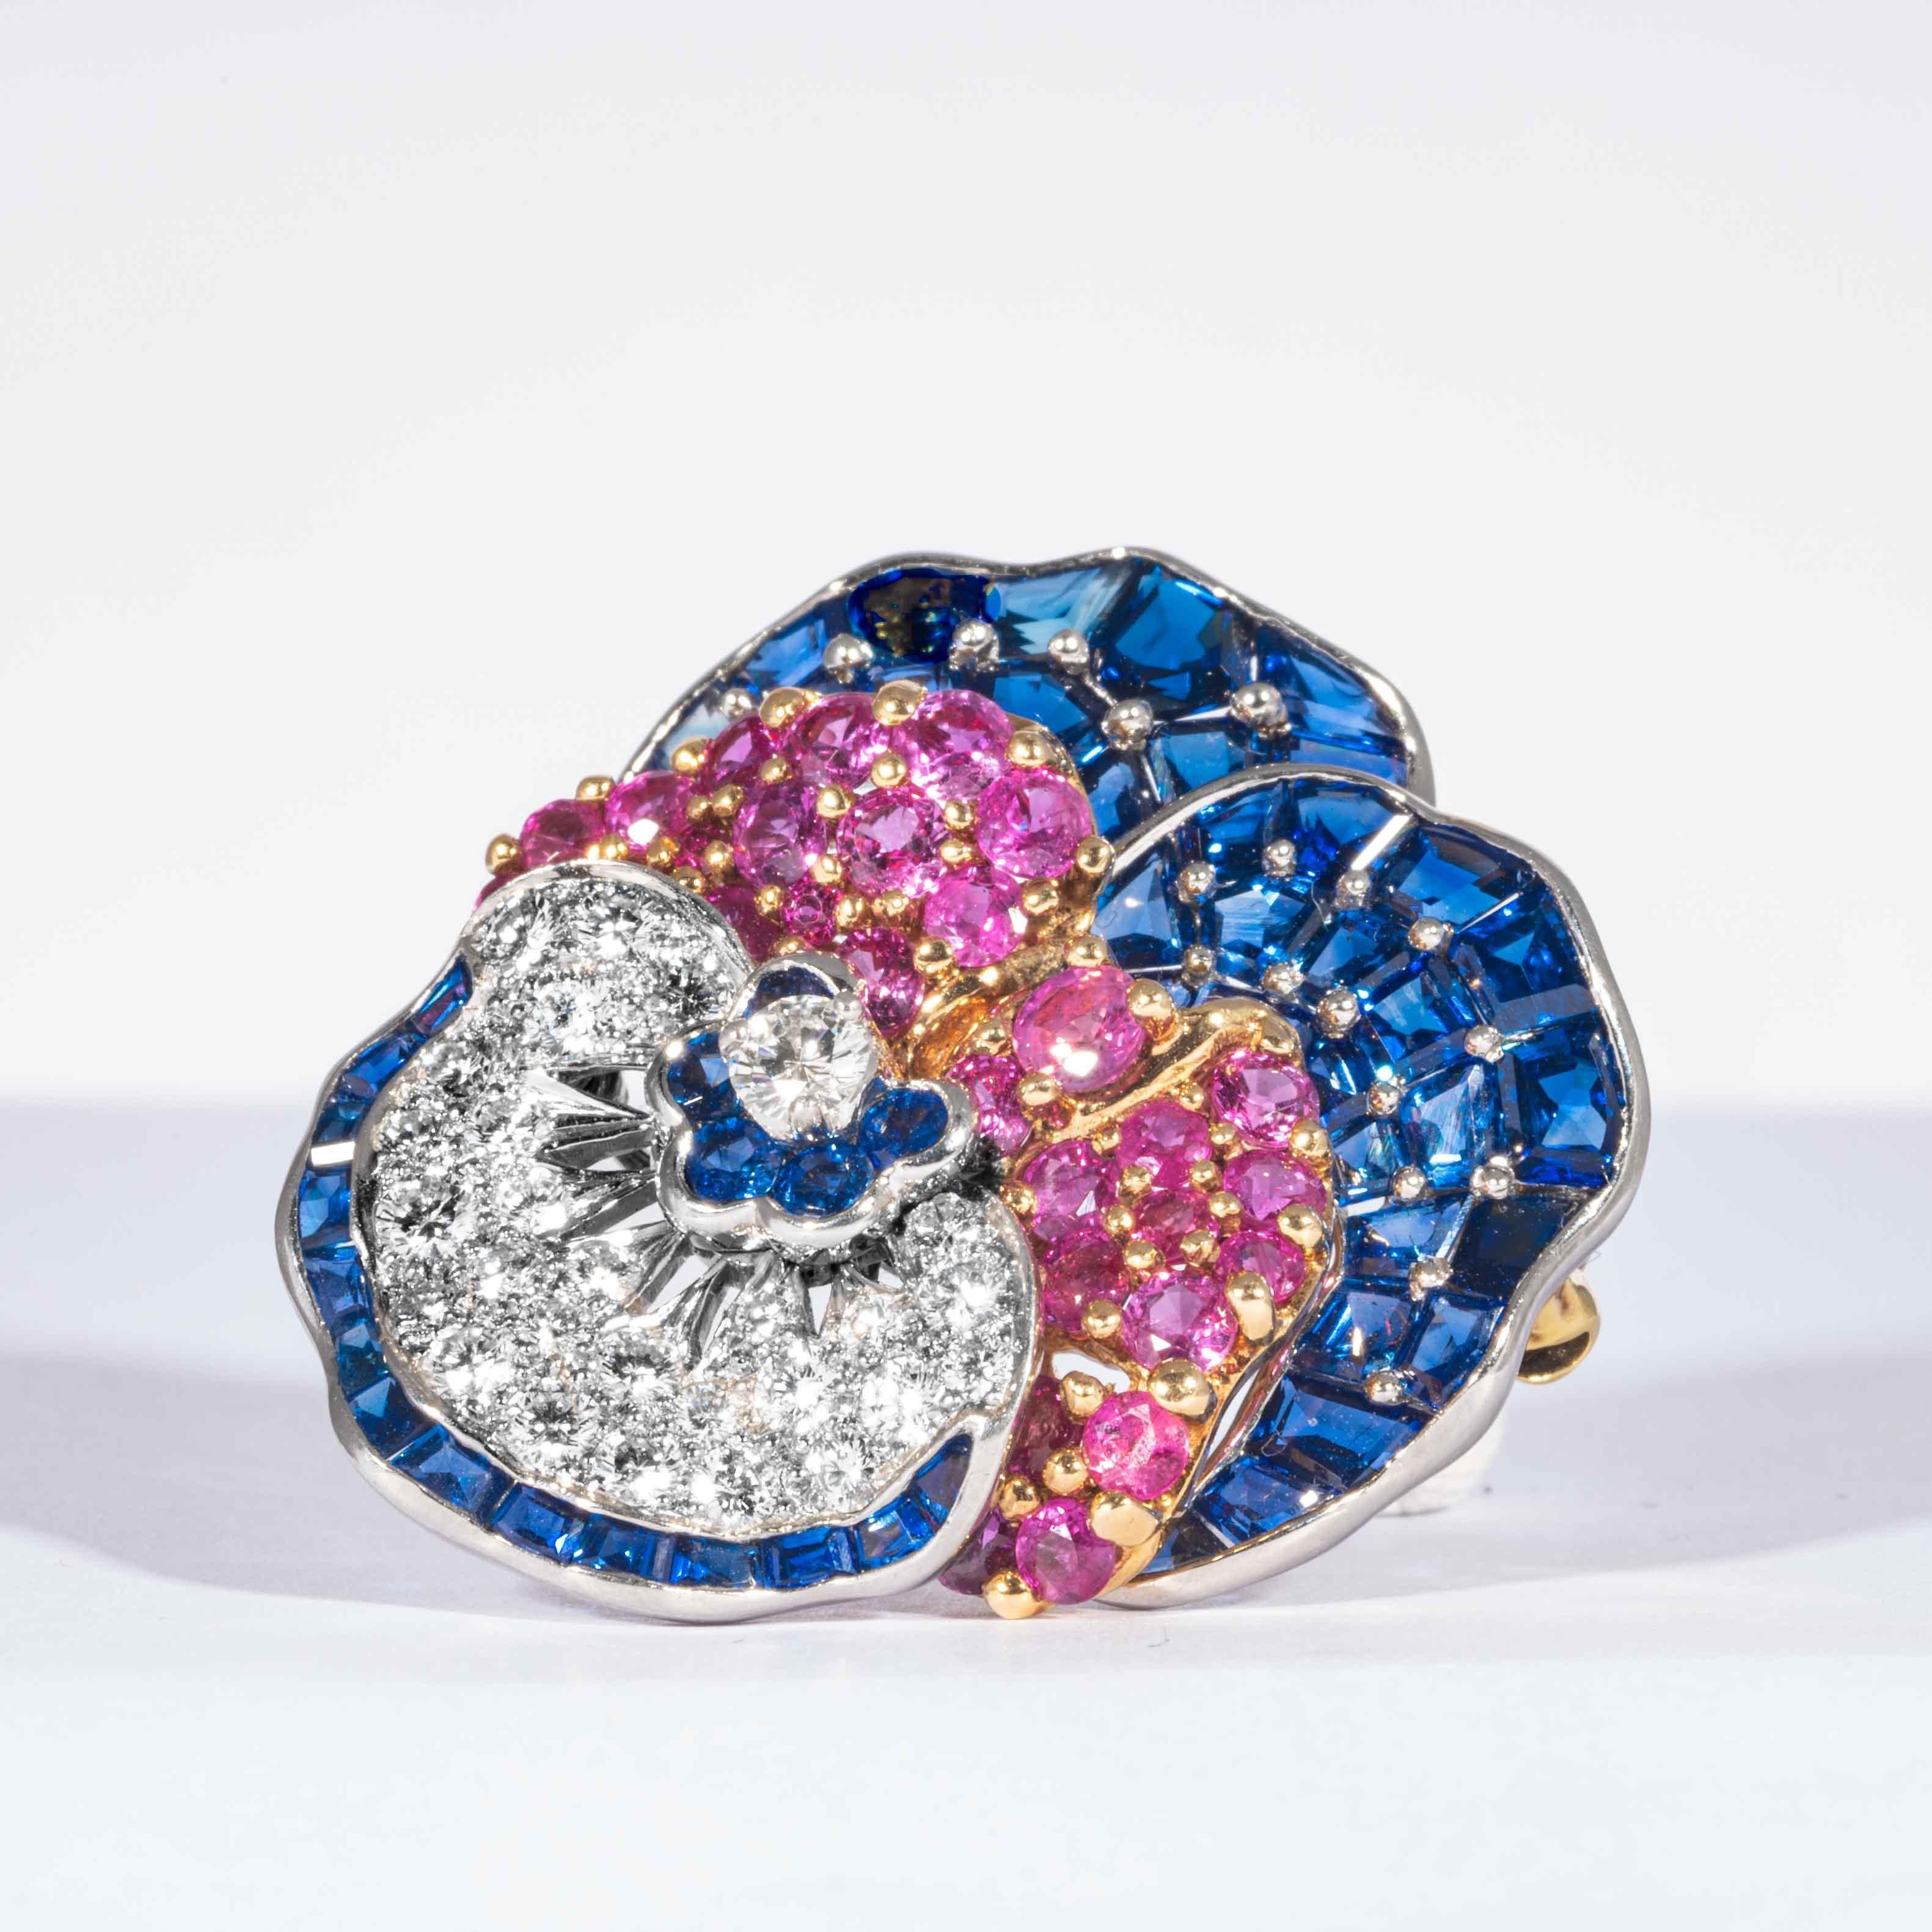 Blue, fancy pink sapphires and diamonds are set in 18kt yellow gold and platinum in this whimsically classic floral pansy pin.  Consisting of 48 mixed cut blue sapphires, 5 round cut blue sapphires, 30 round cut fancy pink sapphires, and 28 round